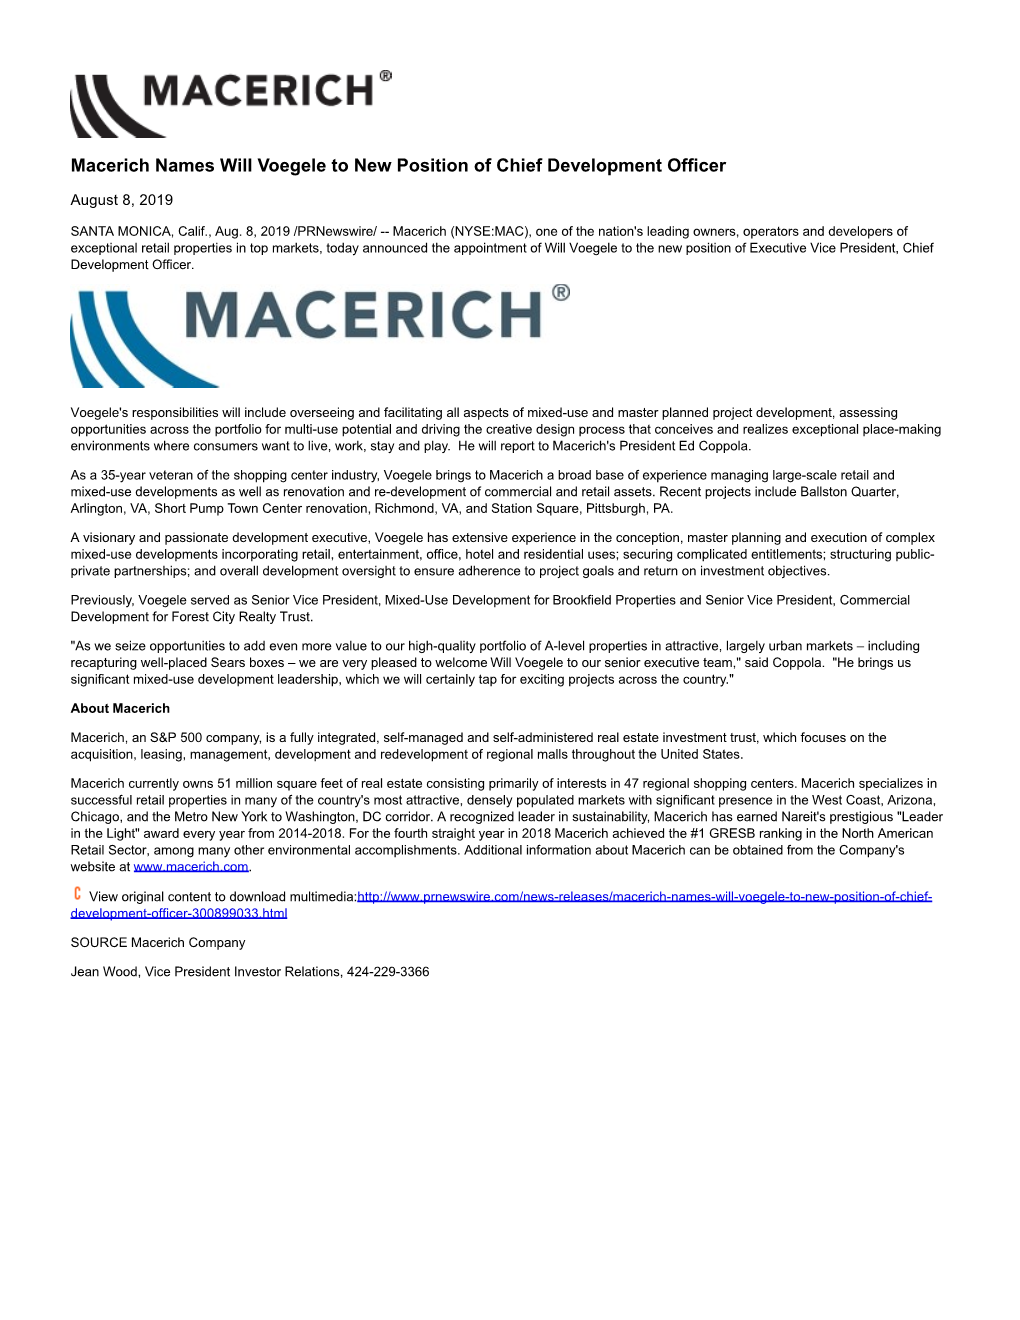 Macerich Names Will Voegele to New Position of Chief Development Officer